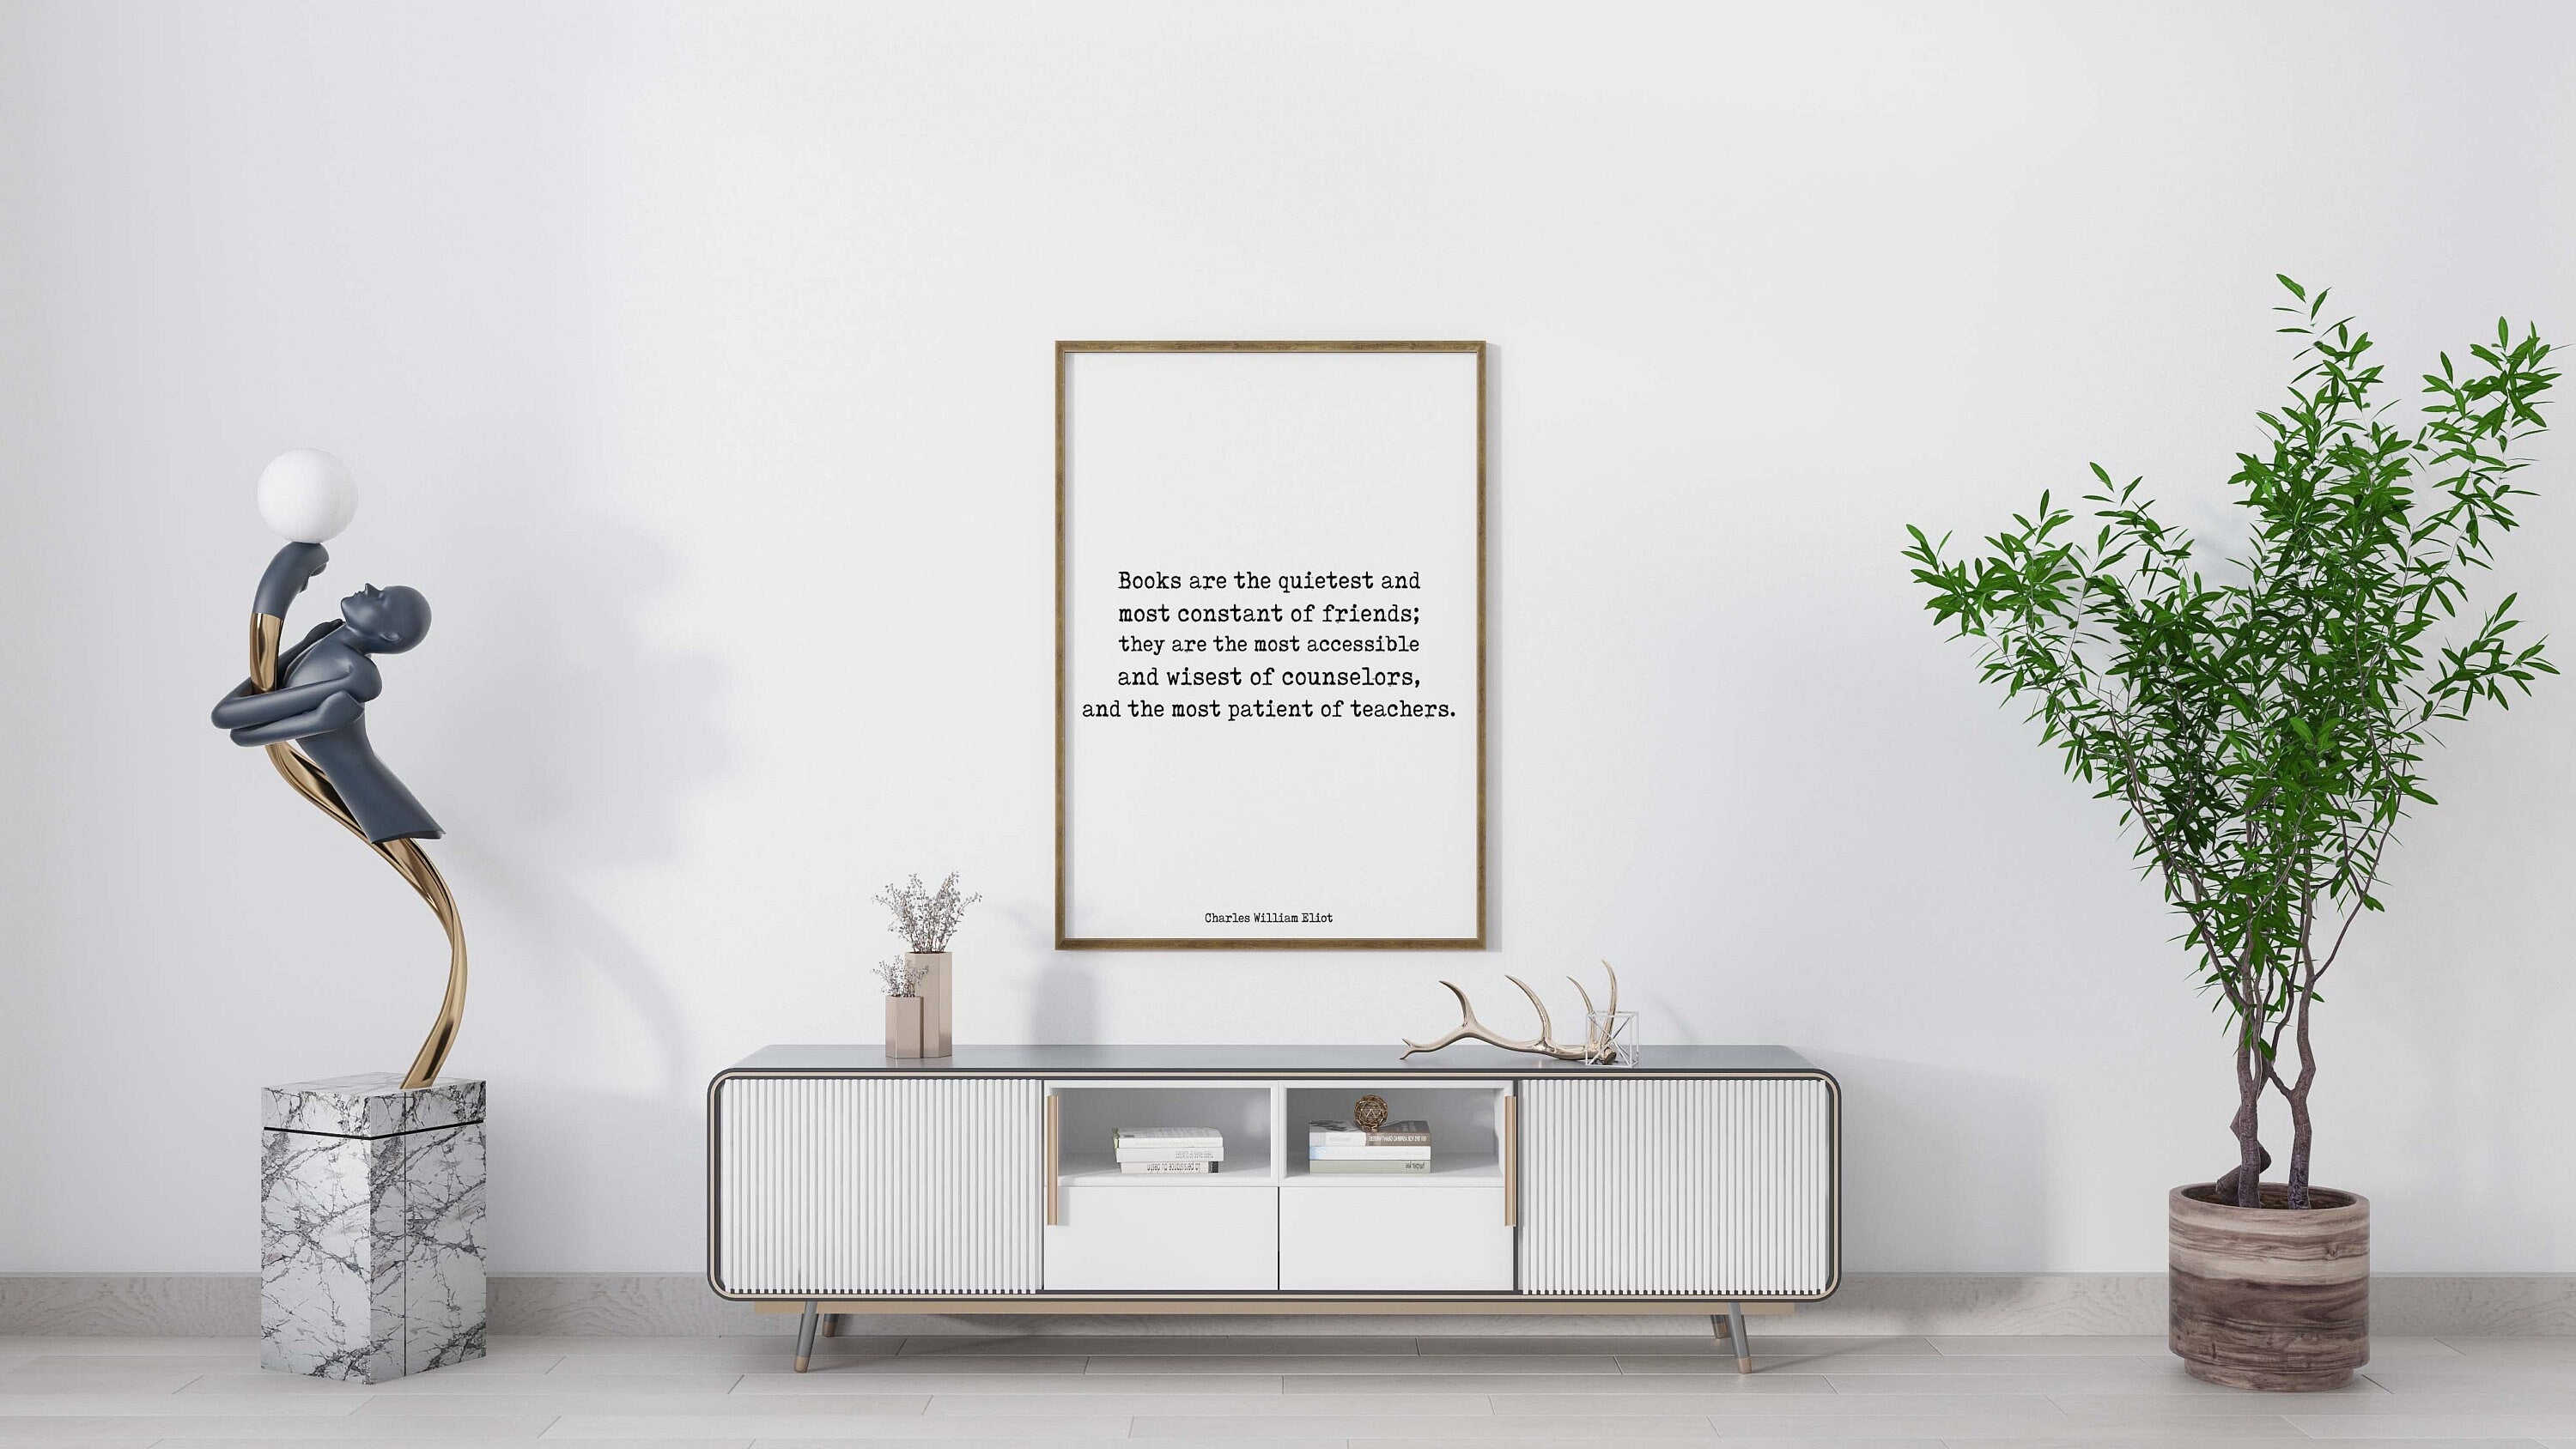 Books Are The Most Constant Friend Book Quote Decor Art Print, Inspirational Quote Library Art Print unframed Bookish Writer Gift